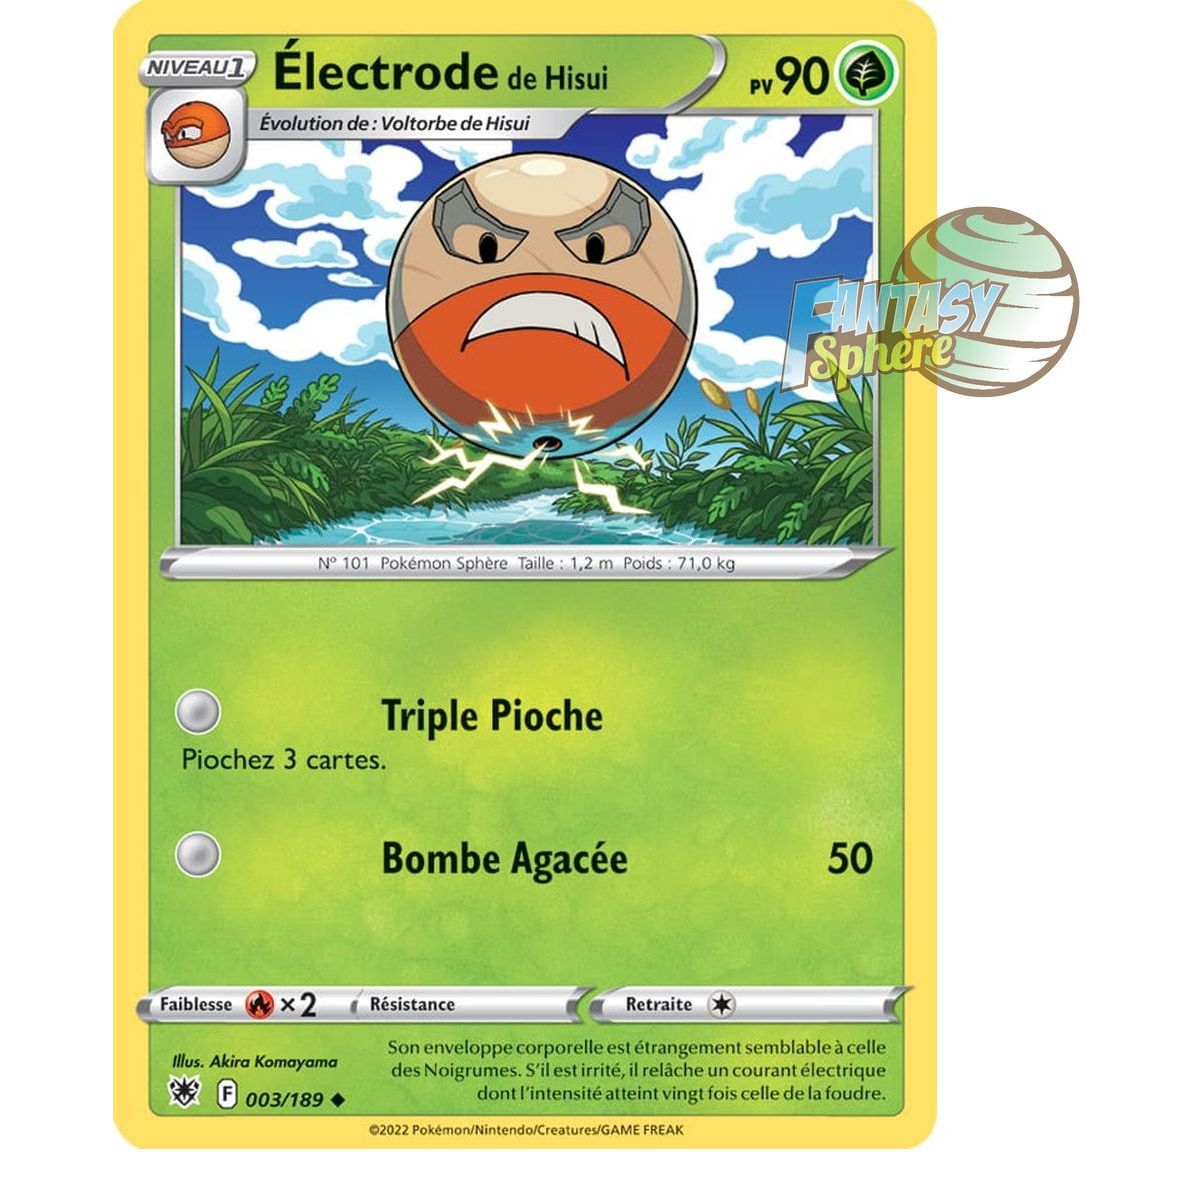 Hisui Electrode - Uncommon 3/189 - Sword and Shield 10 Radiant Stars